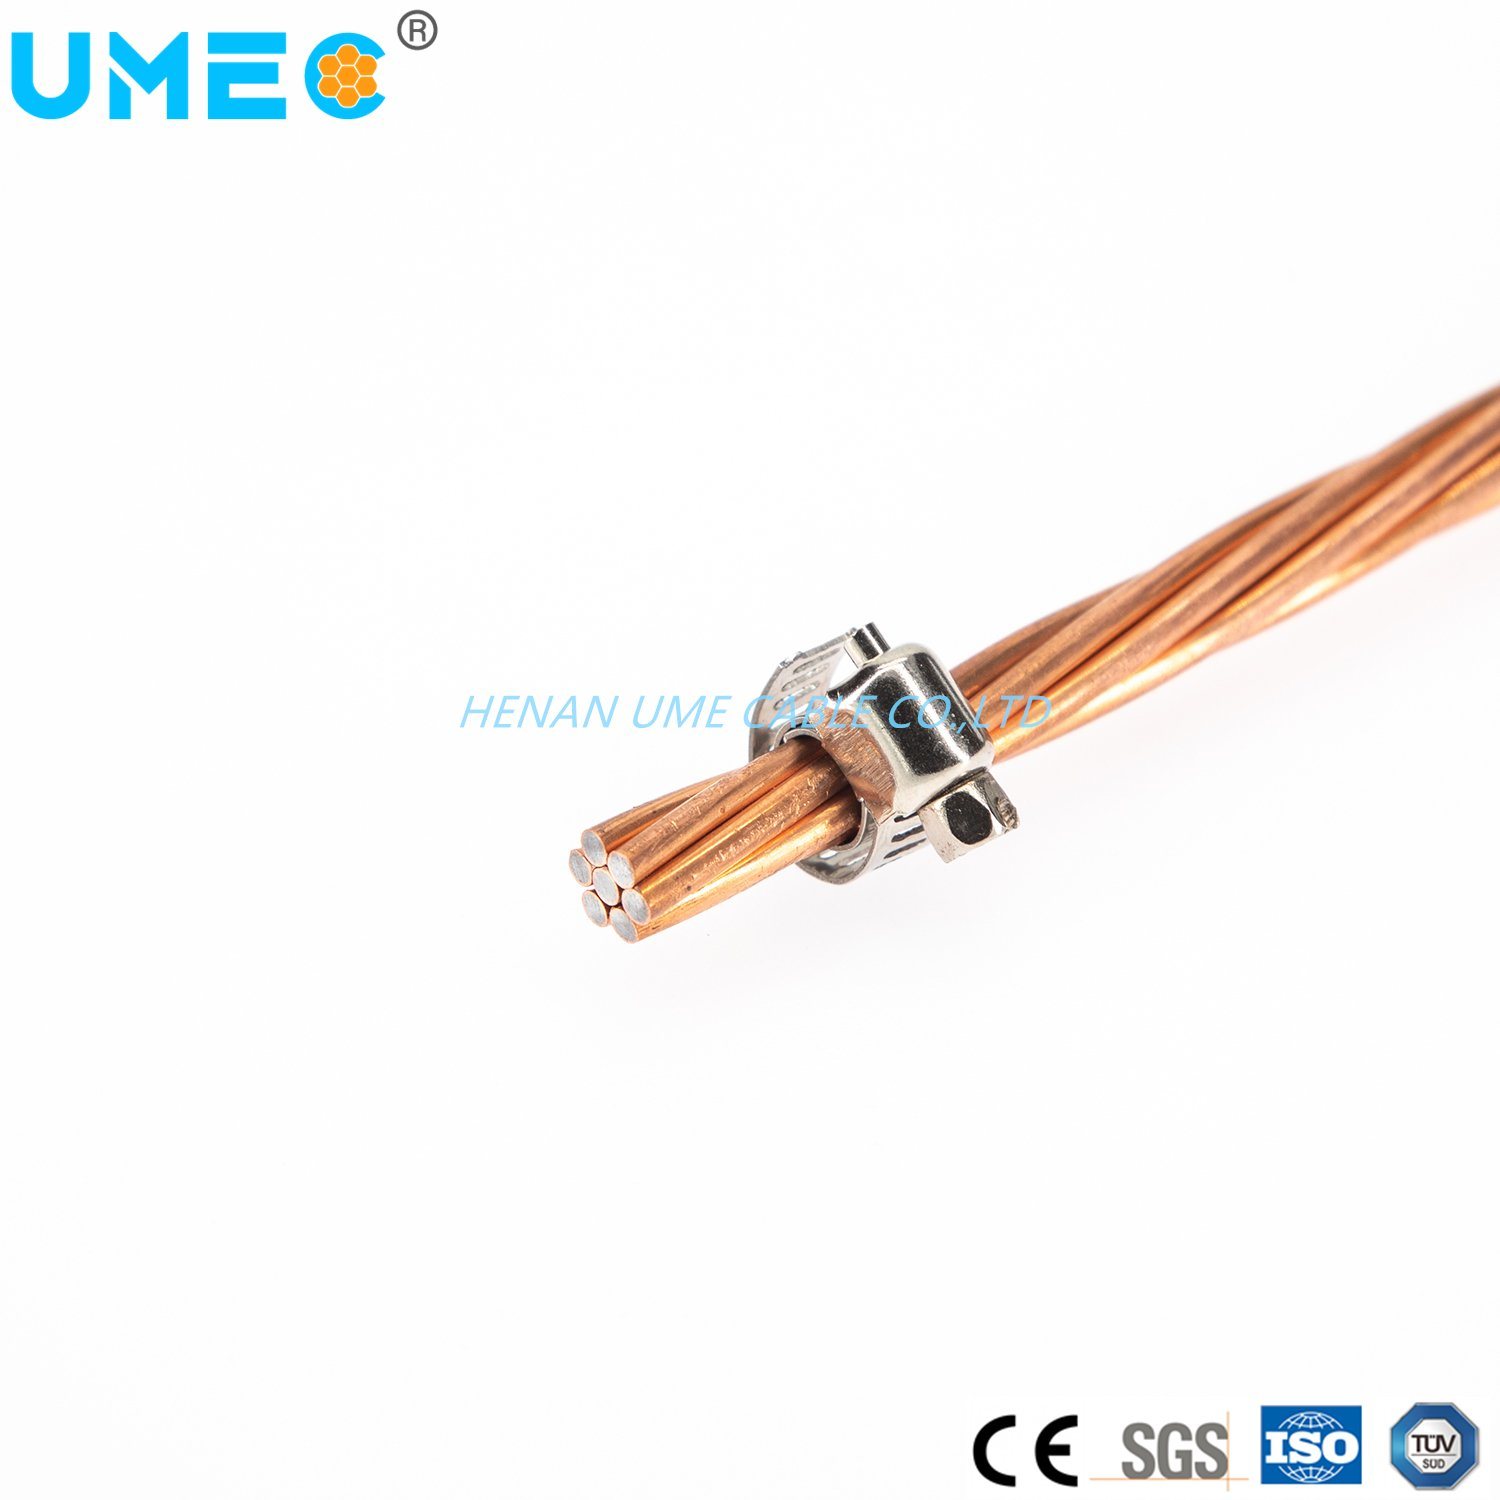 Electrical Ground Good Corrosion Resistance of Copper and High Tensile Strength of Steel 40%Iacs CCS Electric Wire